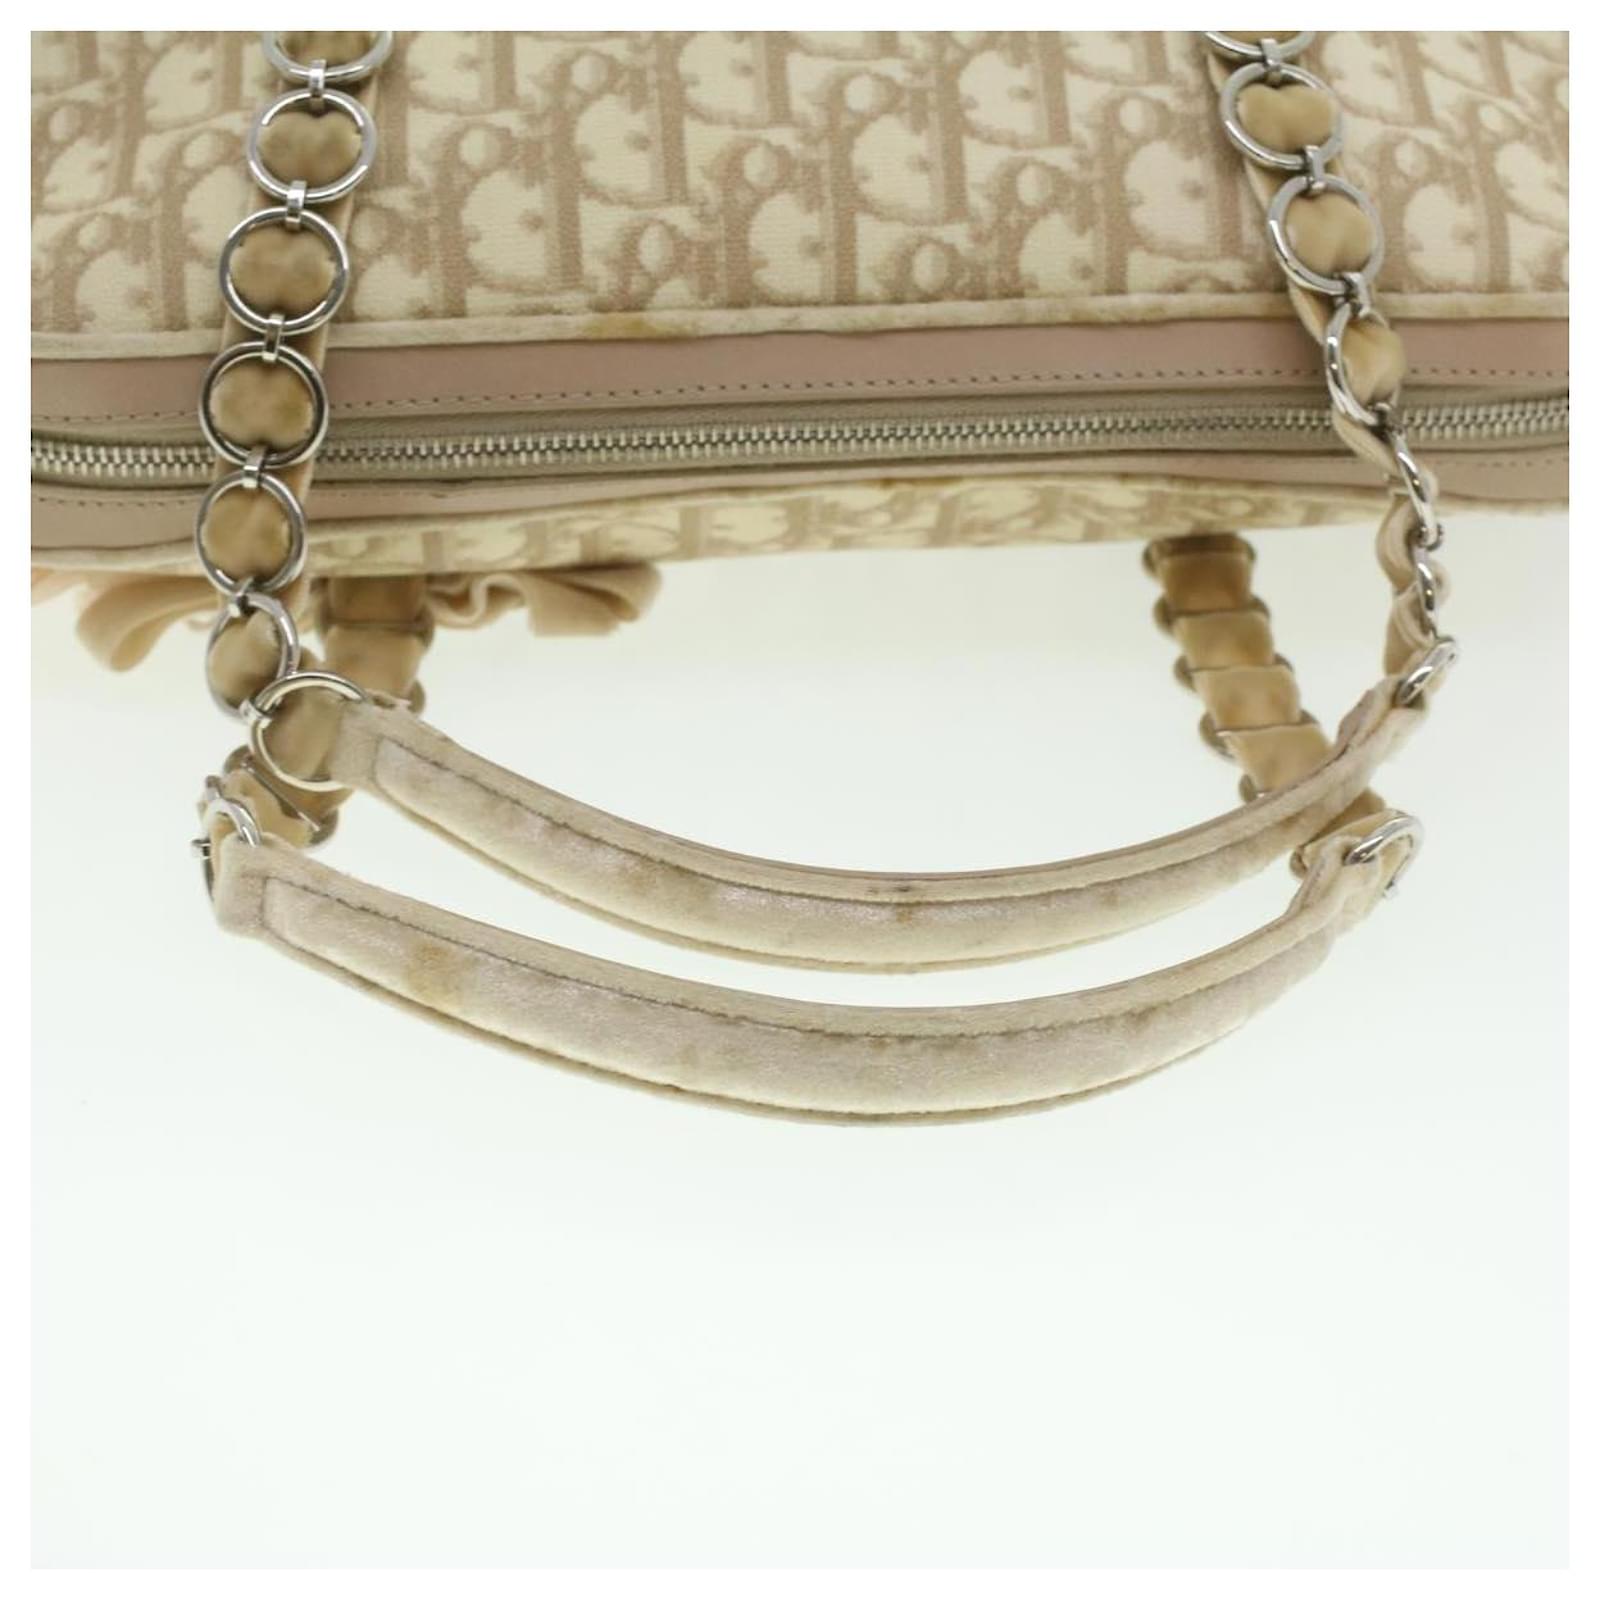 Beige – Chanel Pre - Trotter - Canvas - Leather - Christian